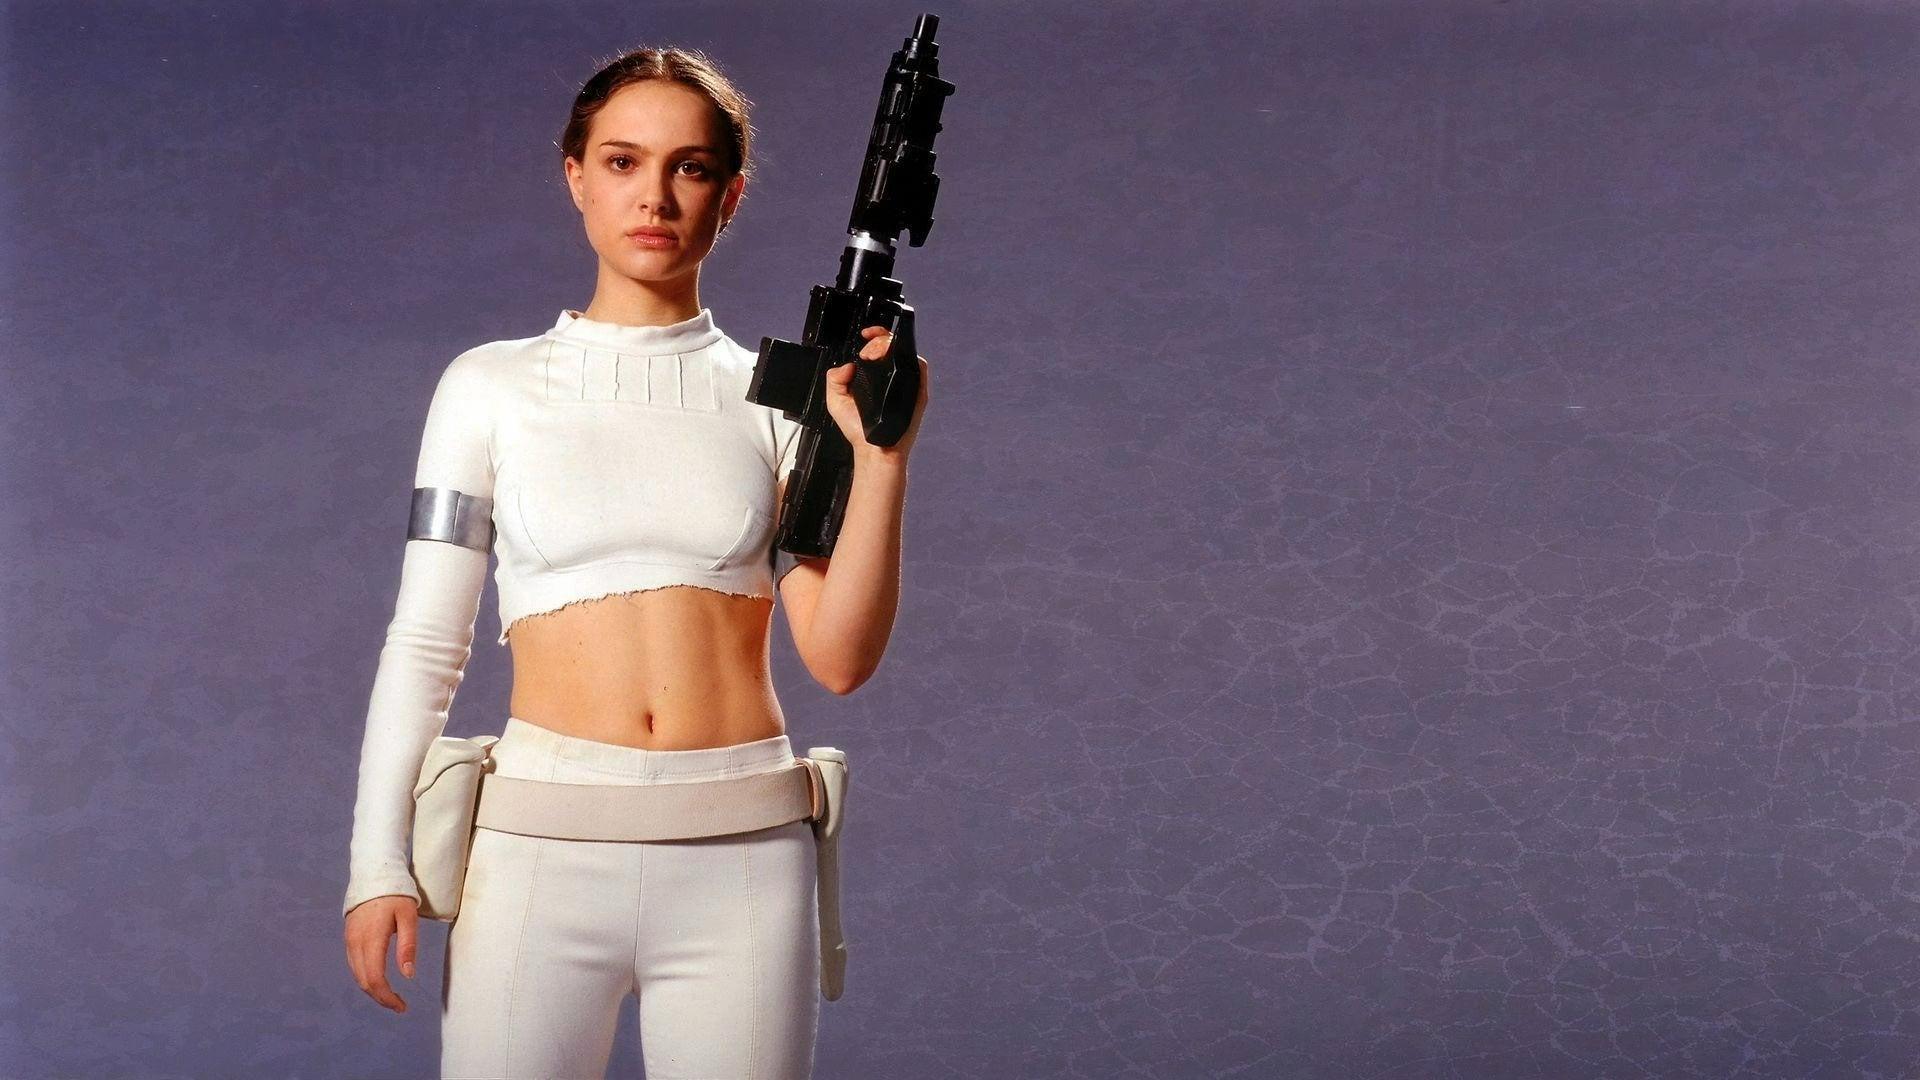 Star Wars Padme Wallpapers - Top Free Star Wars Padme Backgrounds ...